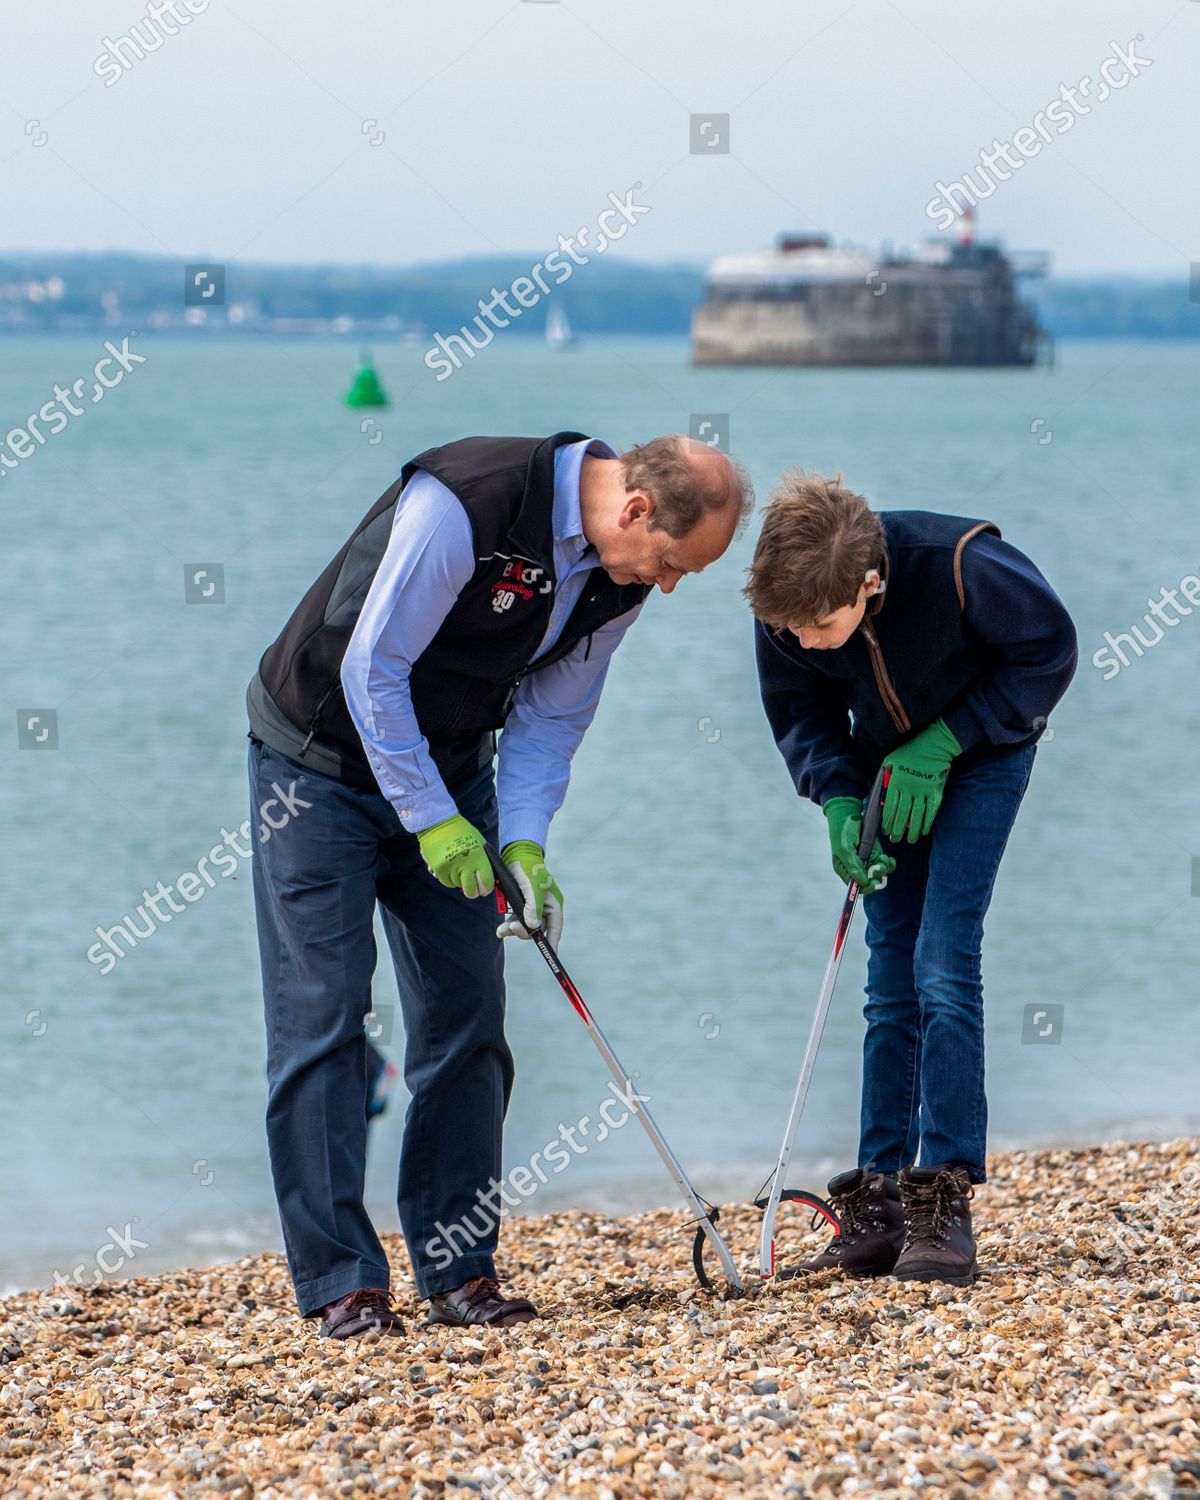 prince-edward-and-sophie-countess-of-wessex-great-british-beach-clean-southsea-beach-portsmouth-uk-shutterstock-editorial-10782998dh.jpg